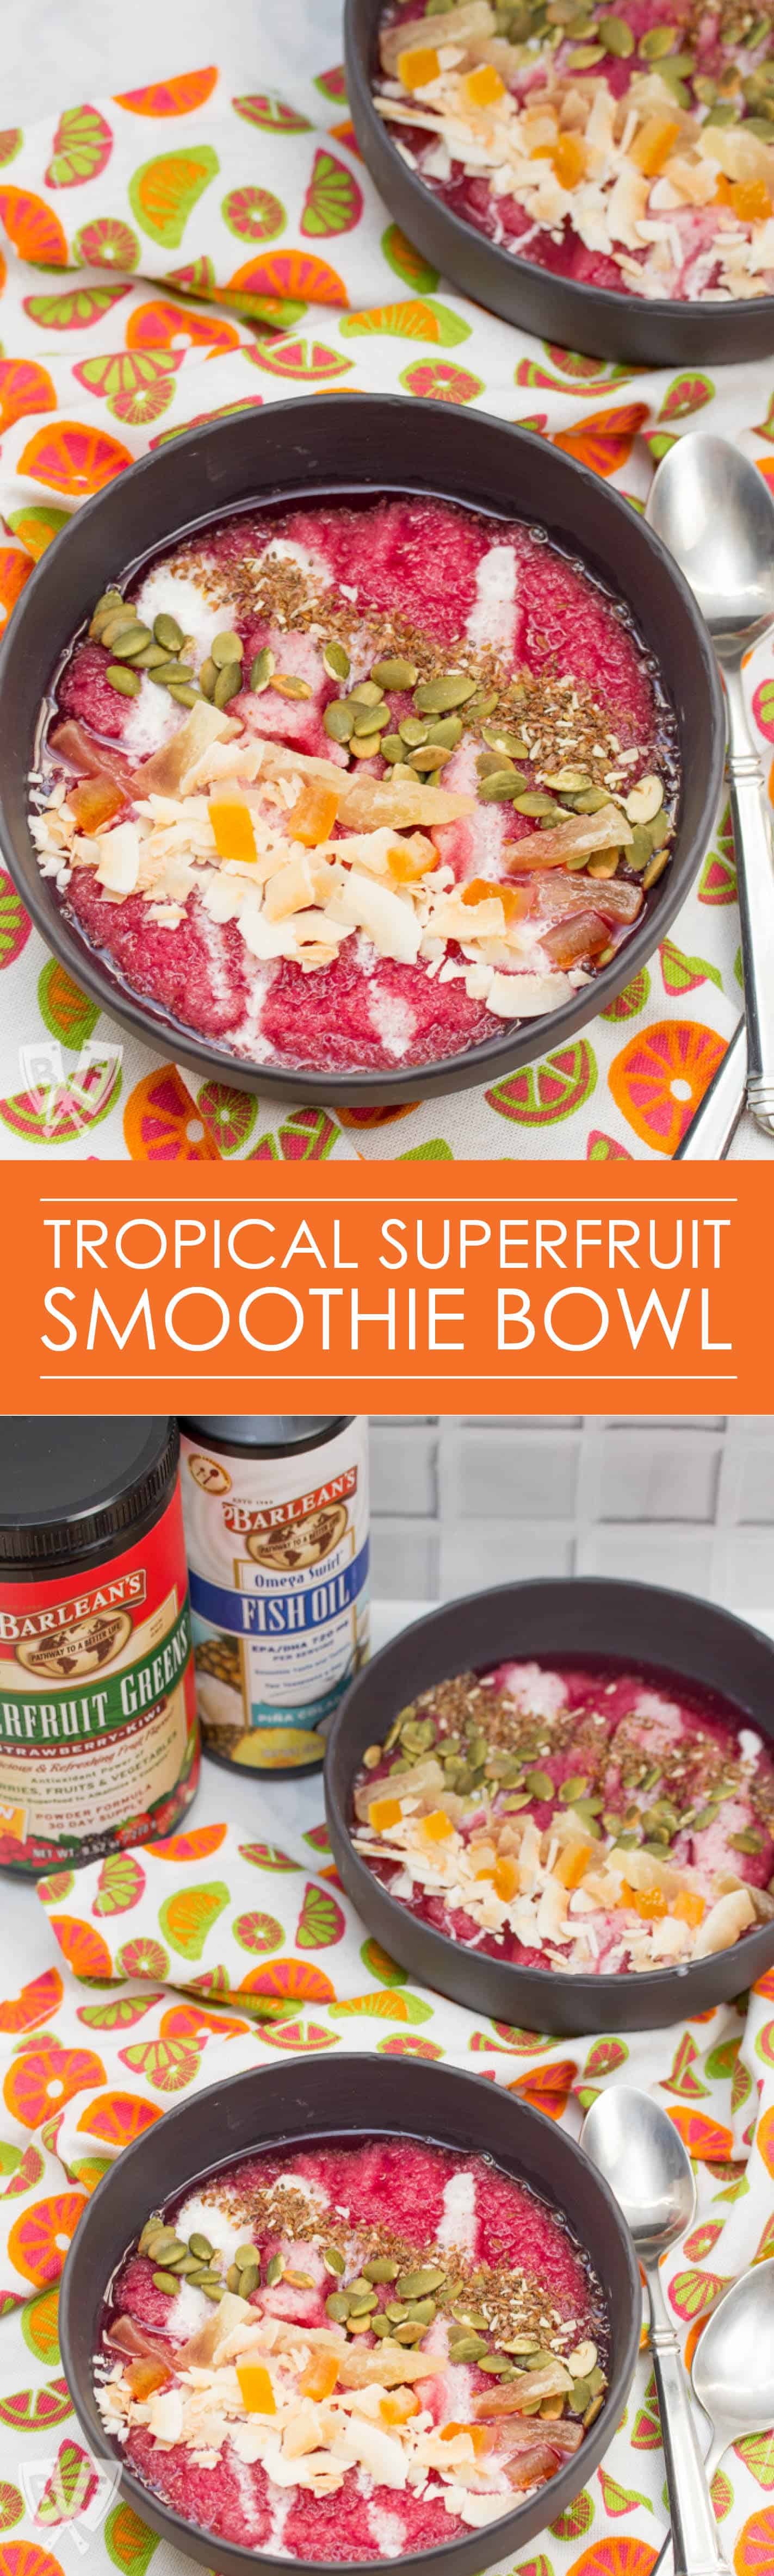 #ad This tropical smoothie bowl is loaded with antioxidants and Omega-3s and is ready in under 5 minutes! An easy, delicious way to wake up and eat your greens! #ChillWithBarleans